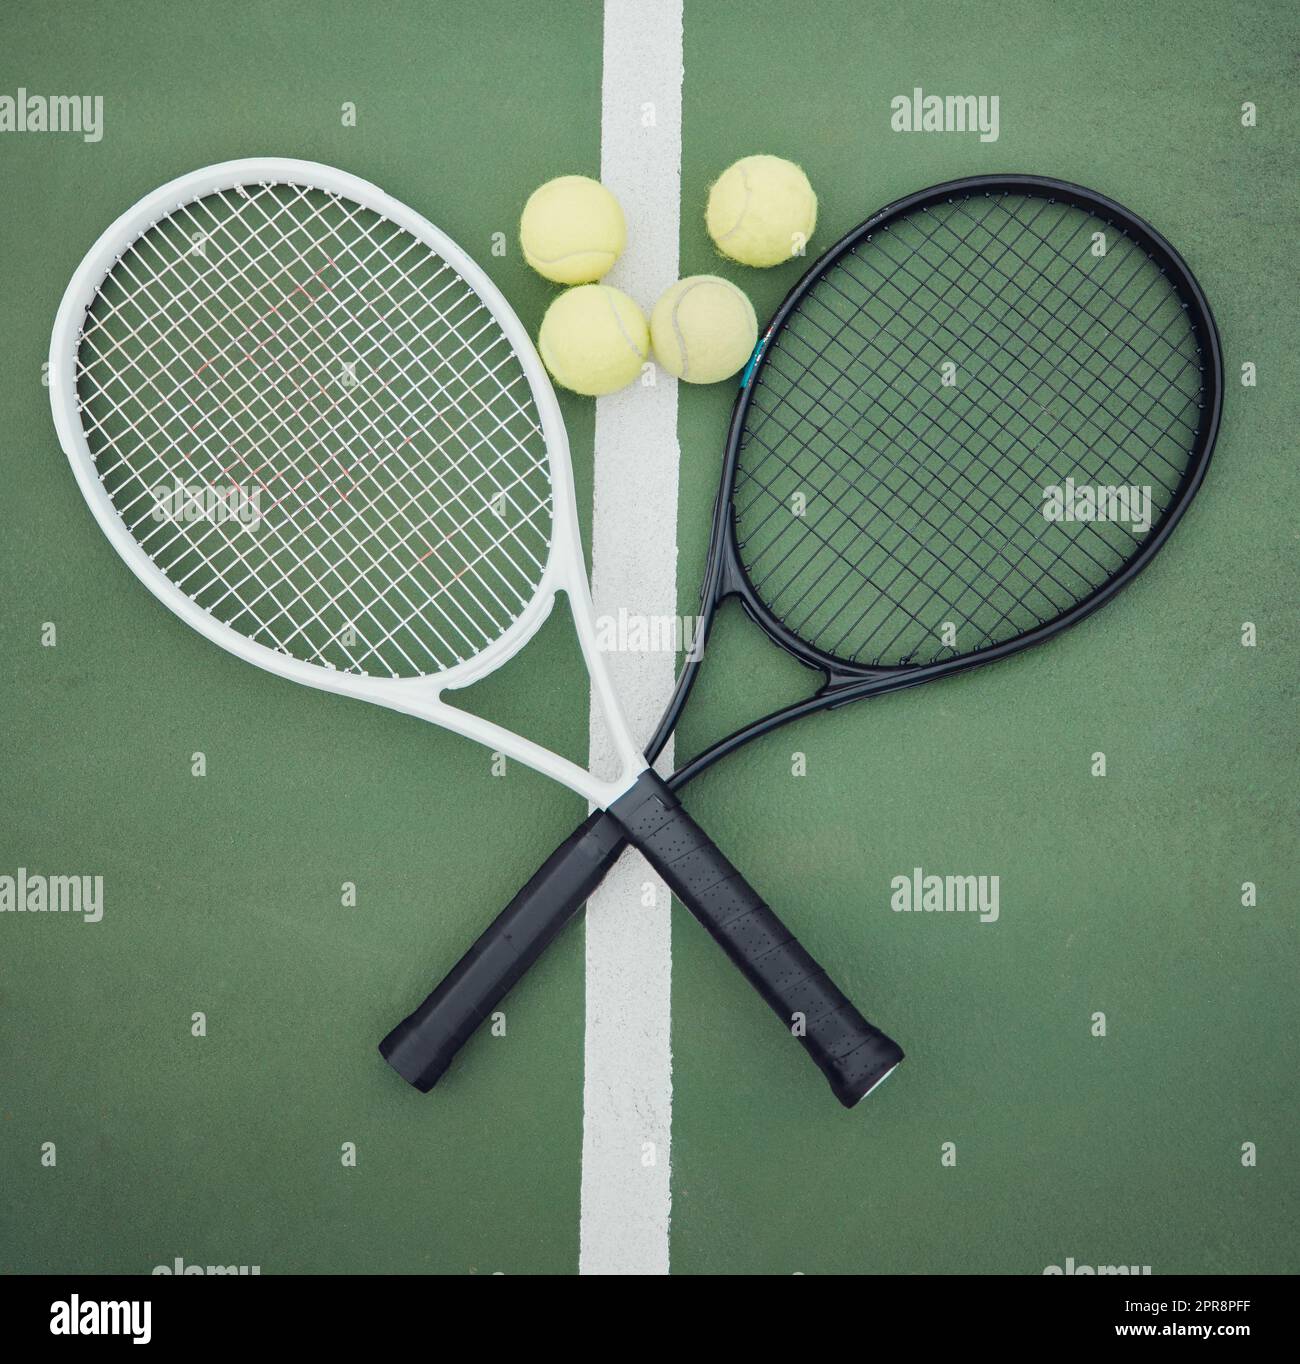 Above view of two tennis rackets and balls on an empty court in a sports club. Aerial view of black and white tennis gear and equipment on asphalt. Ready to play a competitive game versus an opponent Stock Photo